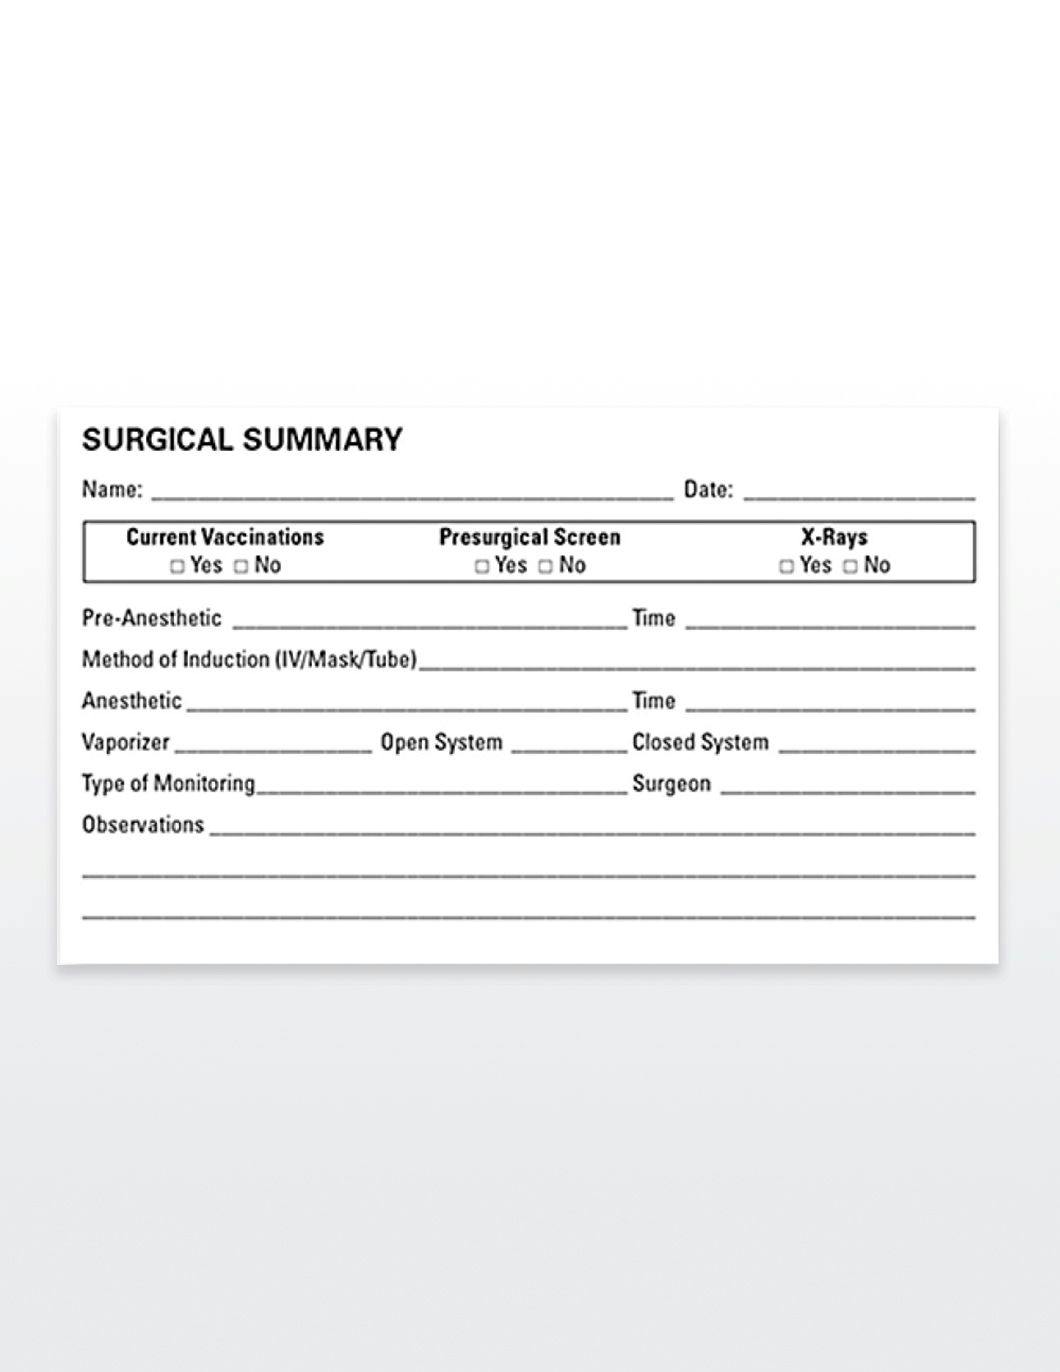 medical-record-labels-surgical-summary